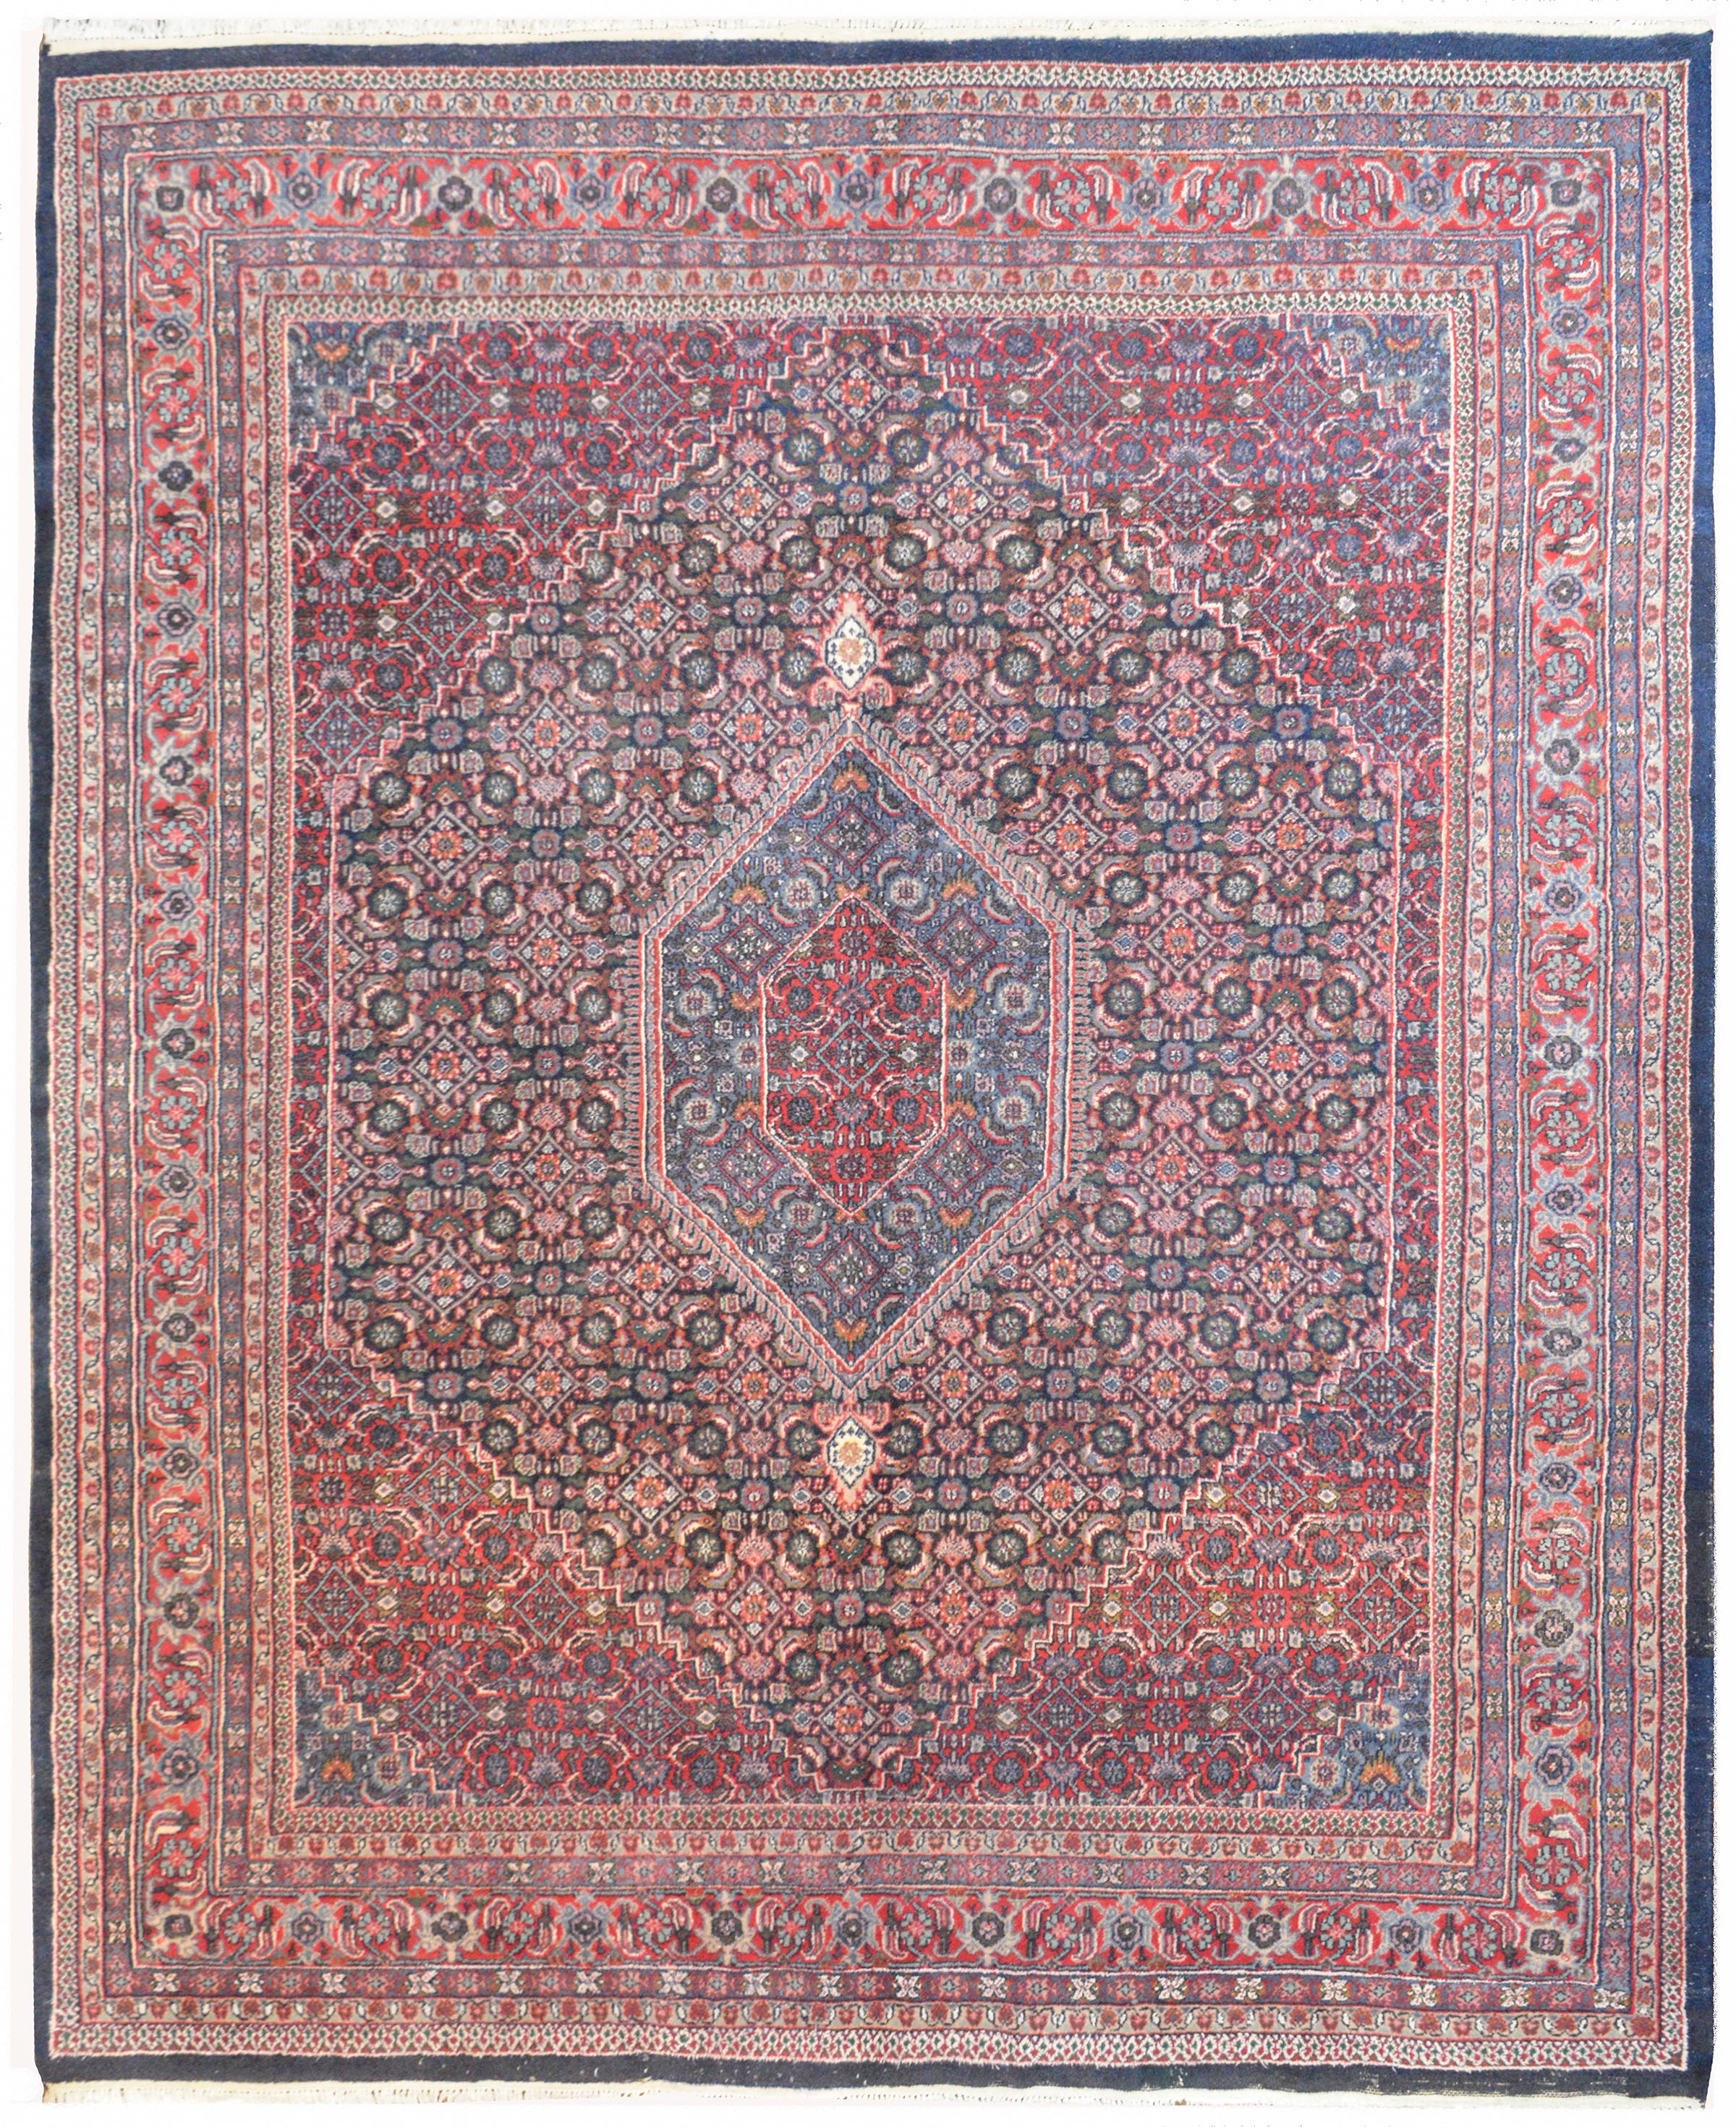 A vintage Indian hand knotted Bidjar rug with multiple floral trellis patterns woven in crimson, pink, white, indigo, green, and gold vegetable dyed wool. The border is composed of multiple thin floral patterned stripes.